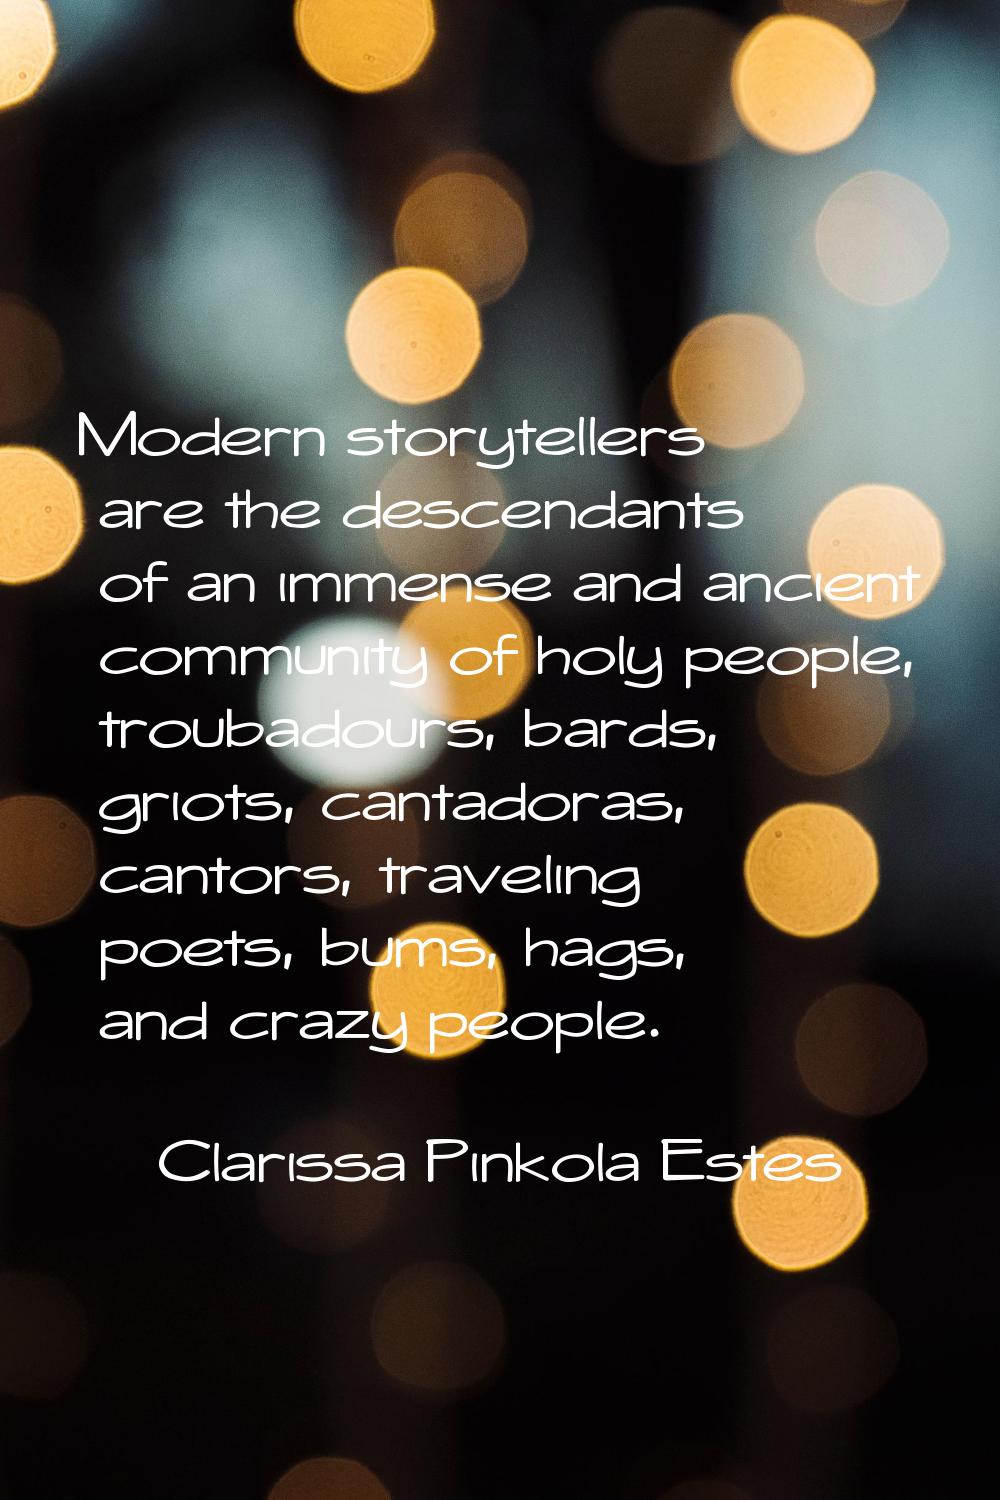 Modern storytellers are the descendants of an immense and ancient community of holy people, troubad